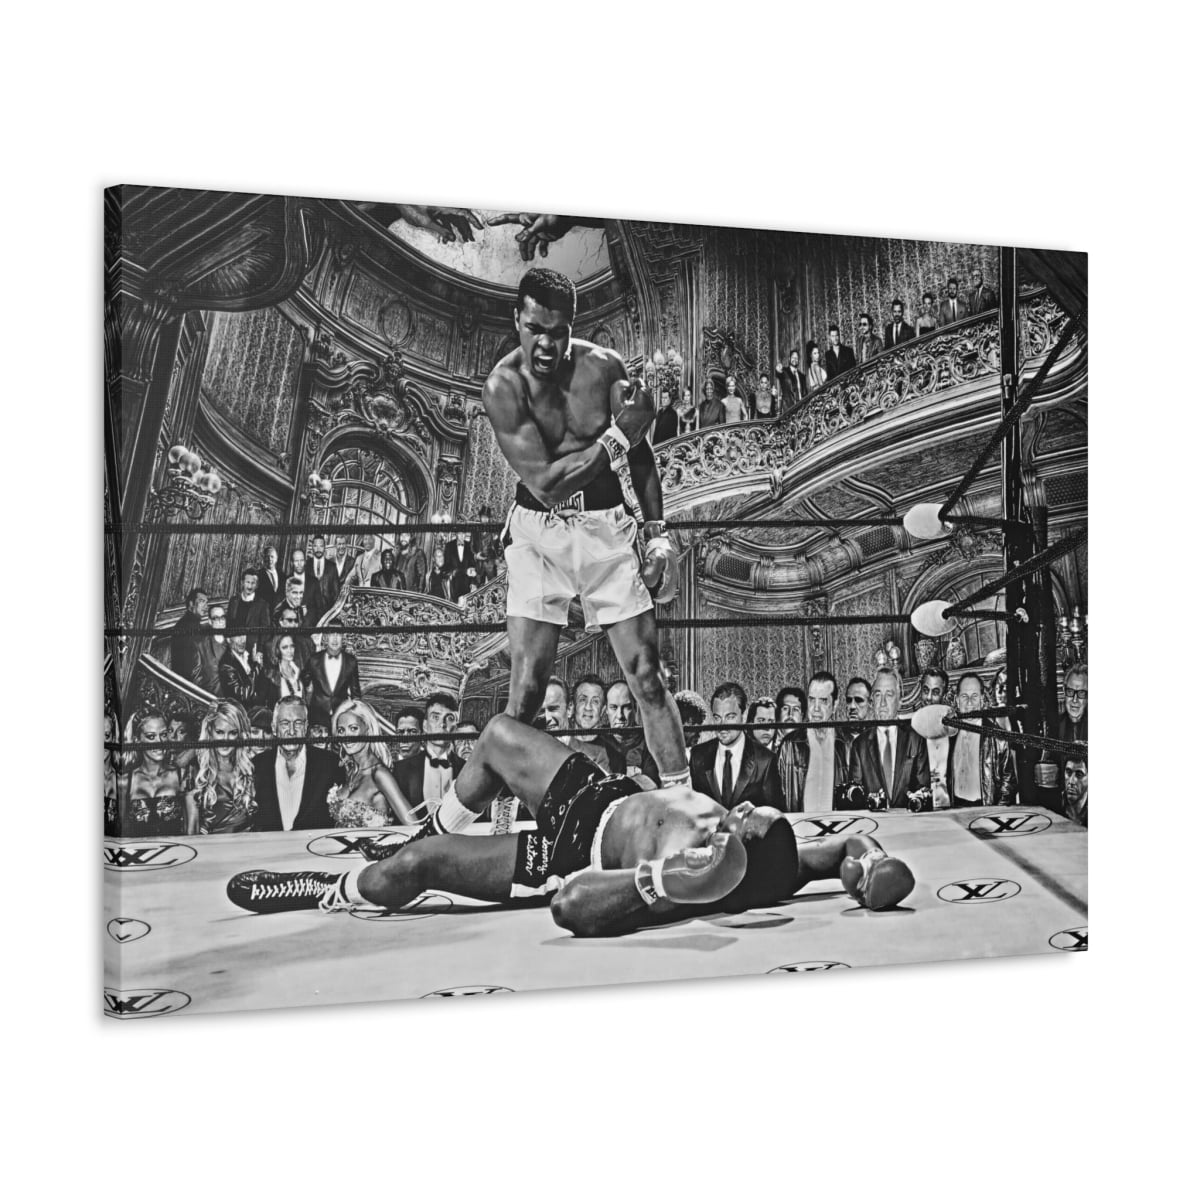 The Best Boxing Event Painting